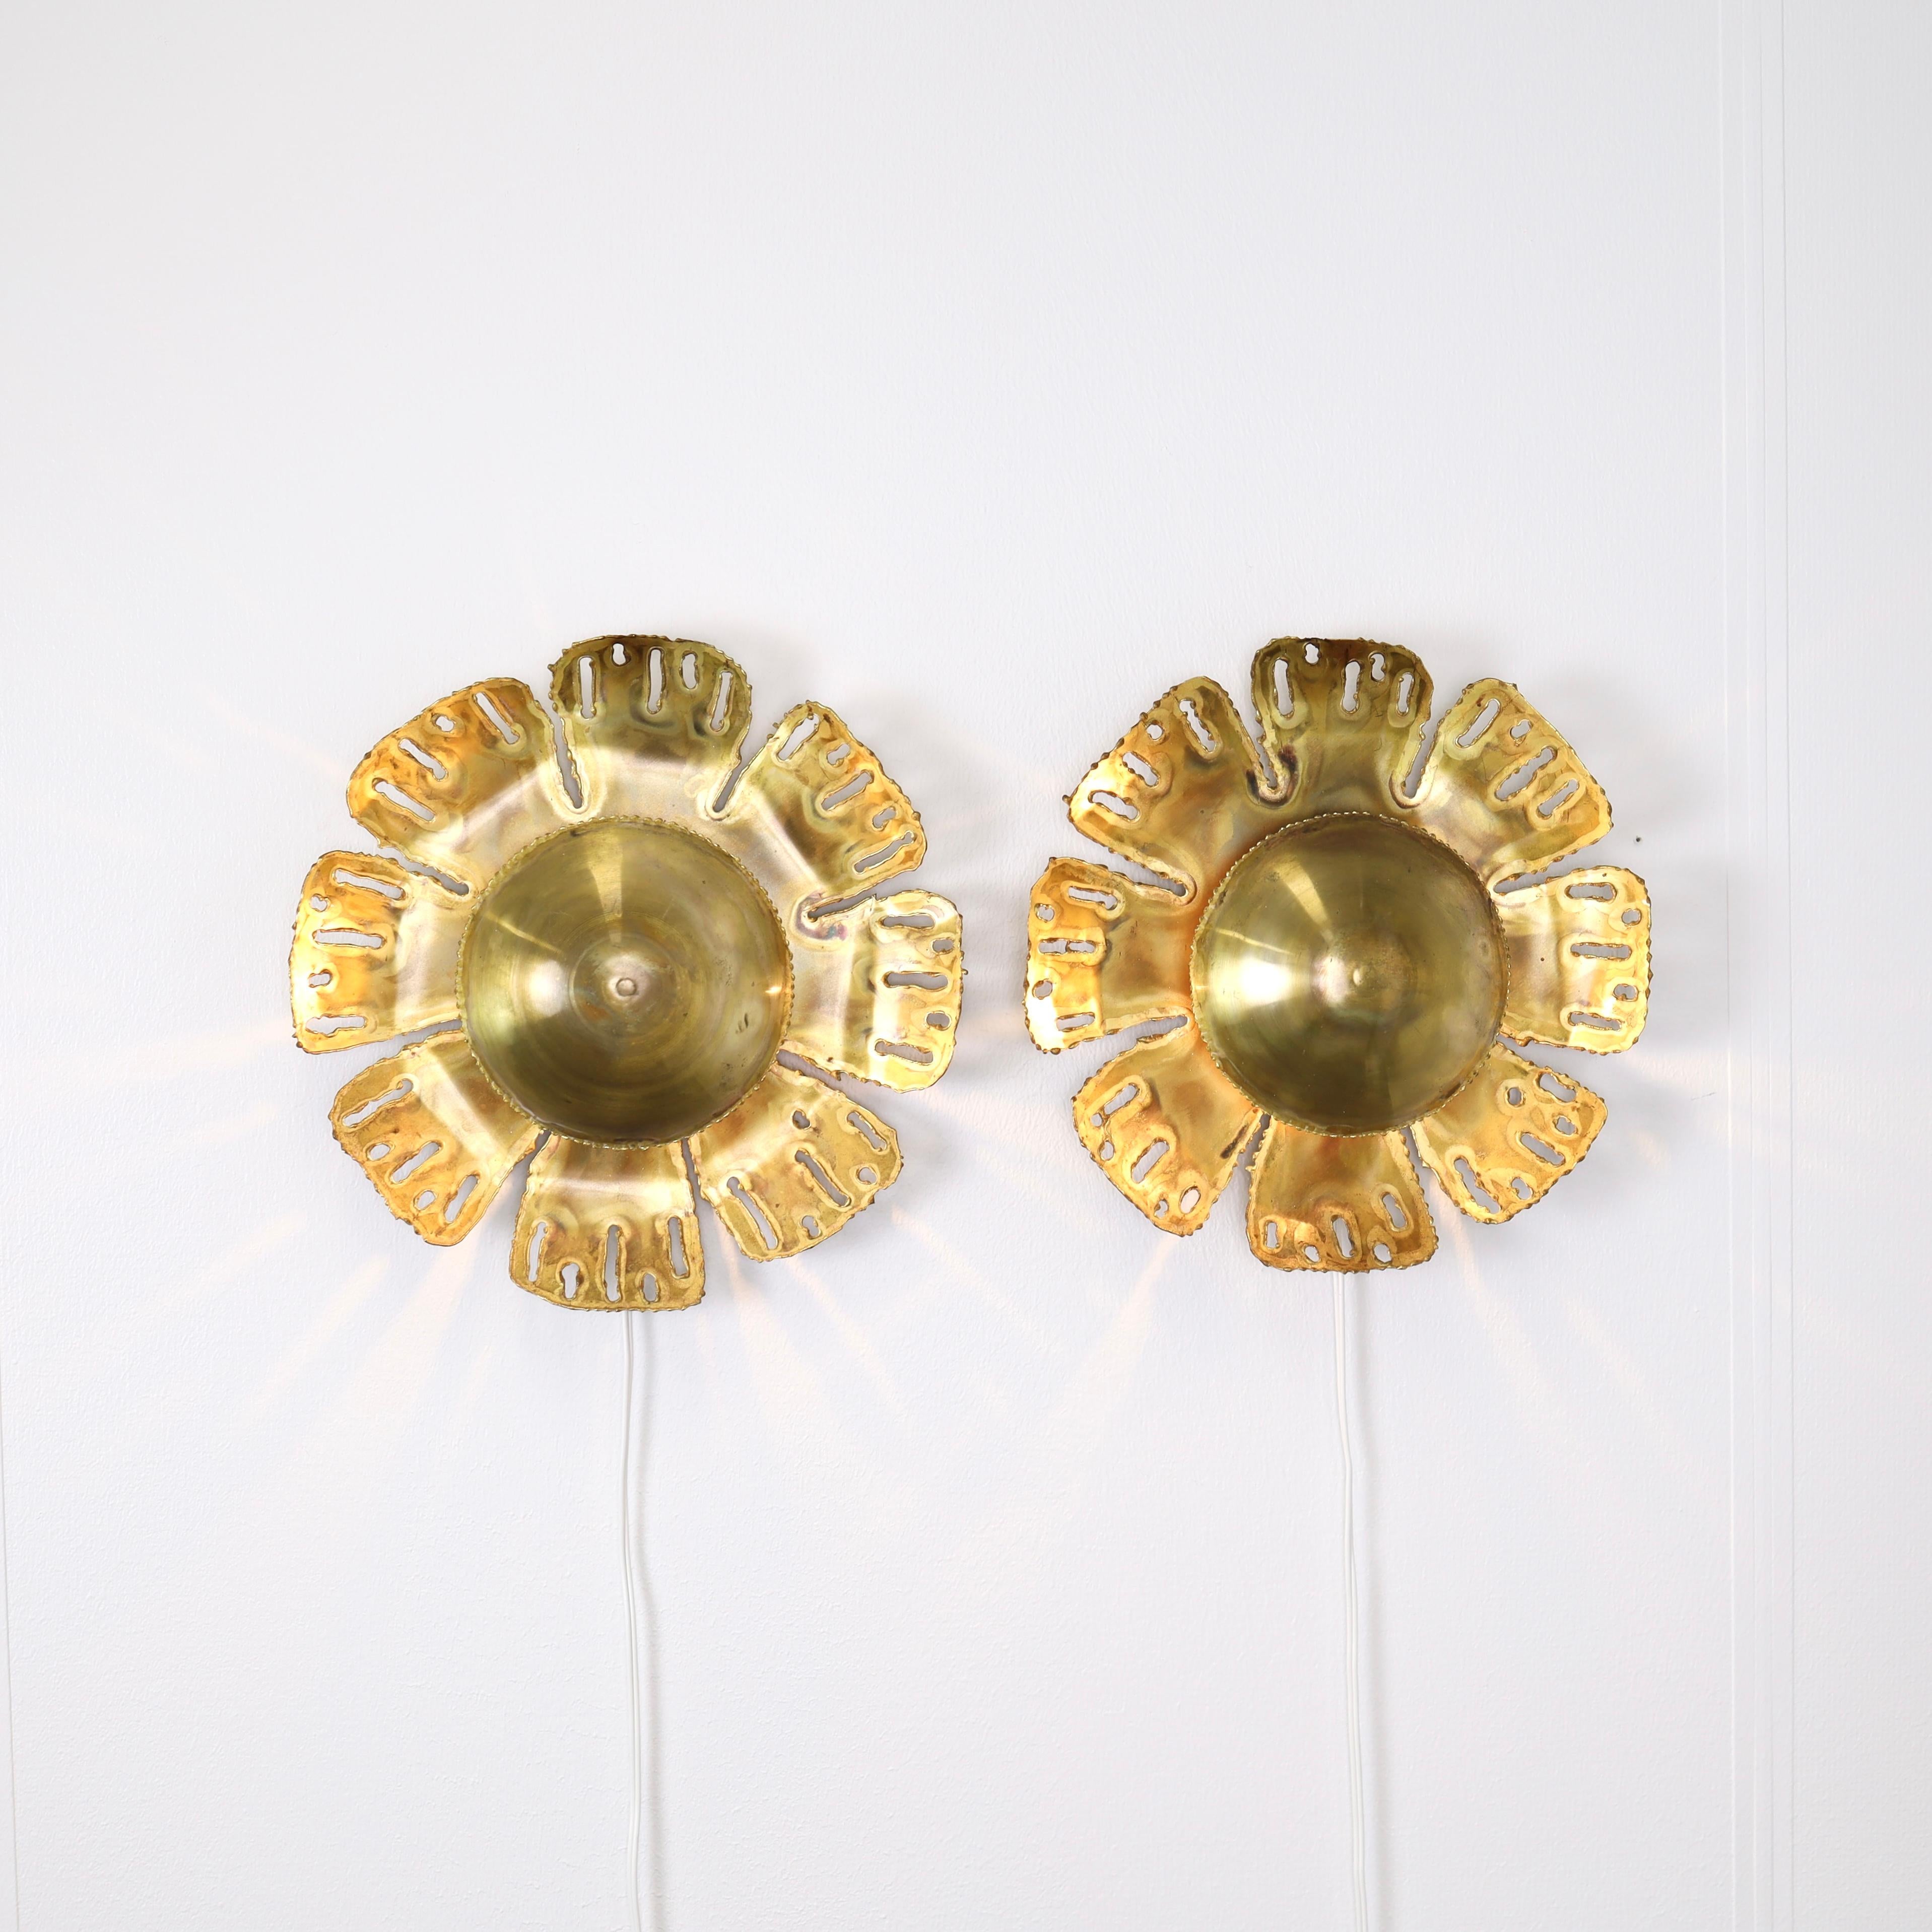 Danish A set of Brass Wall Lamps by Svend Aage Holm Sorensen, 1960s, Denmark For Sale